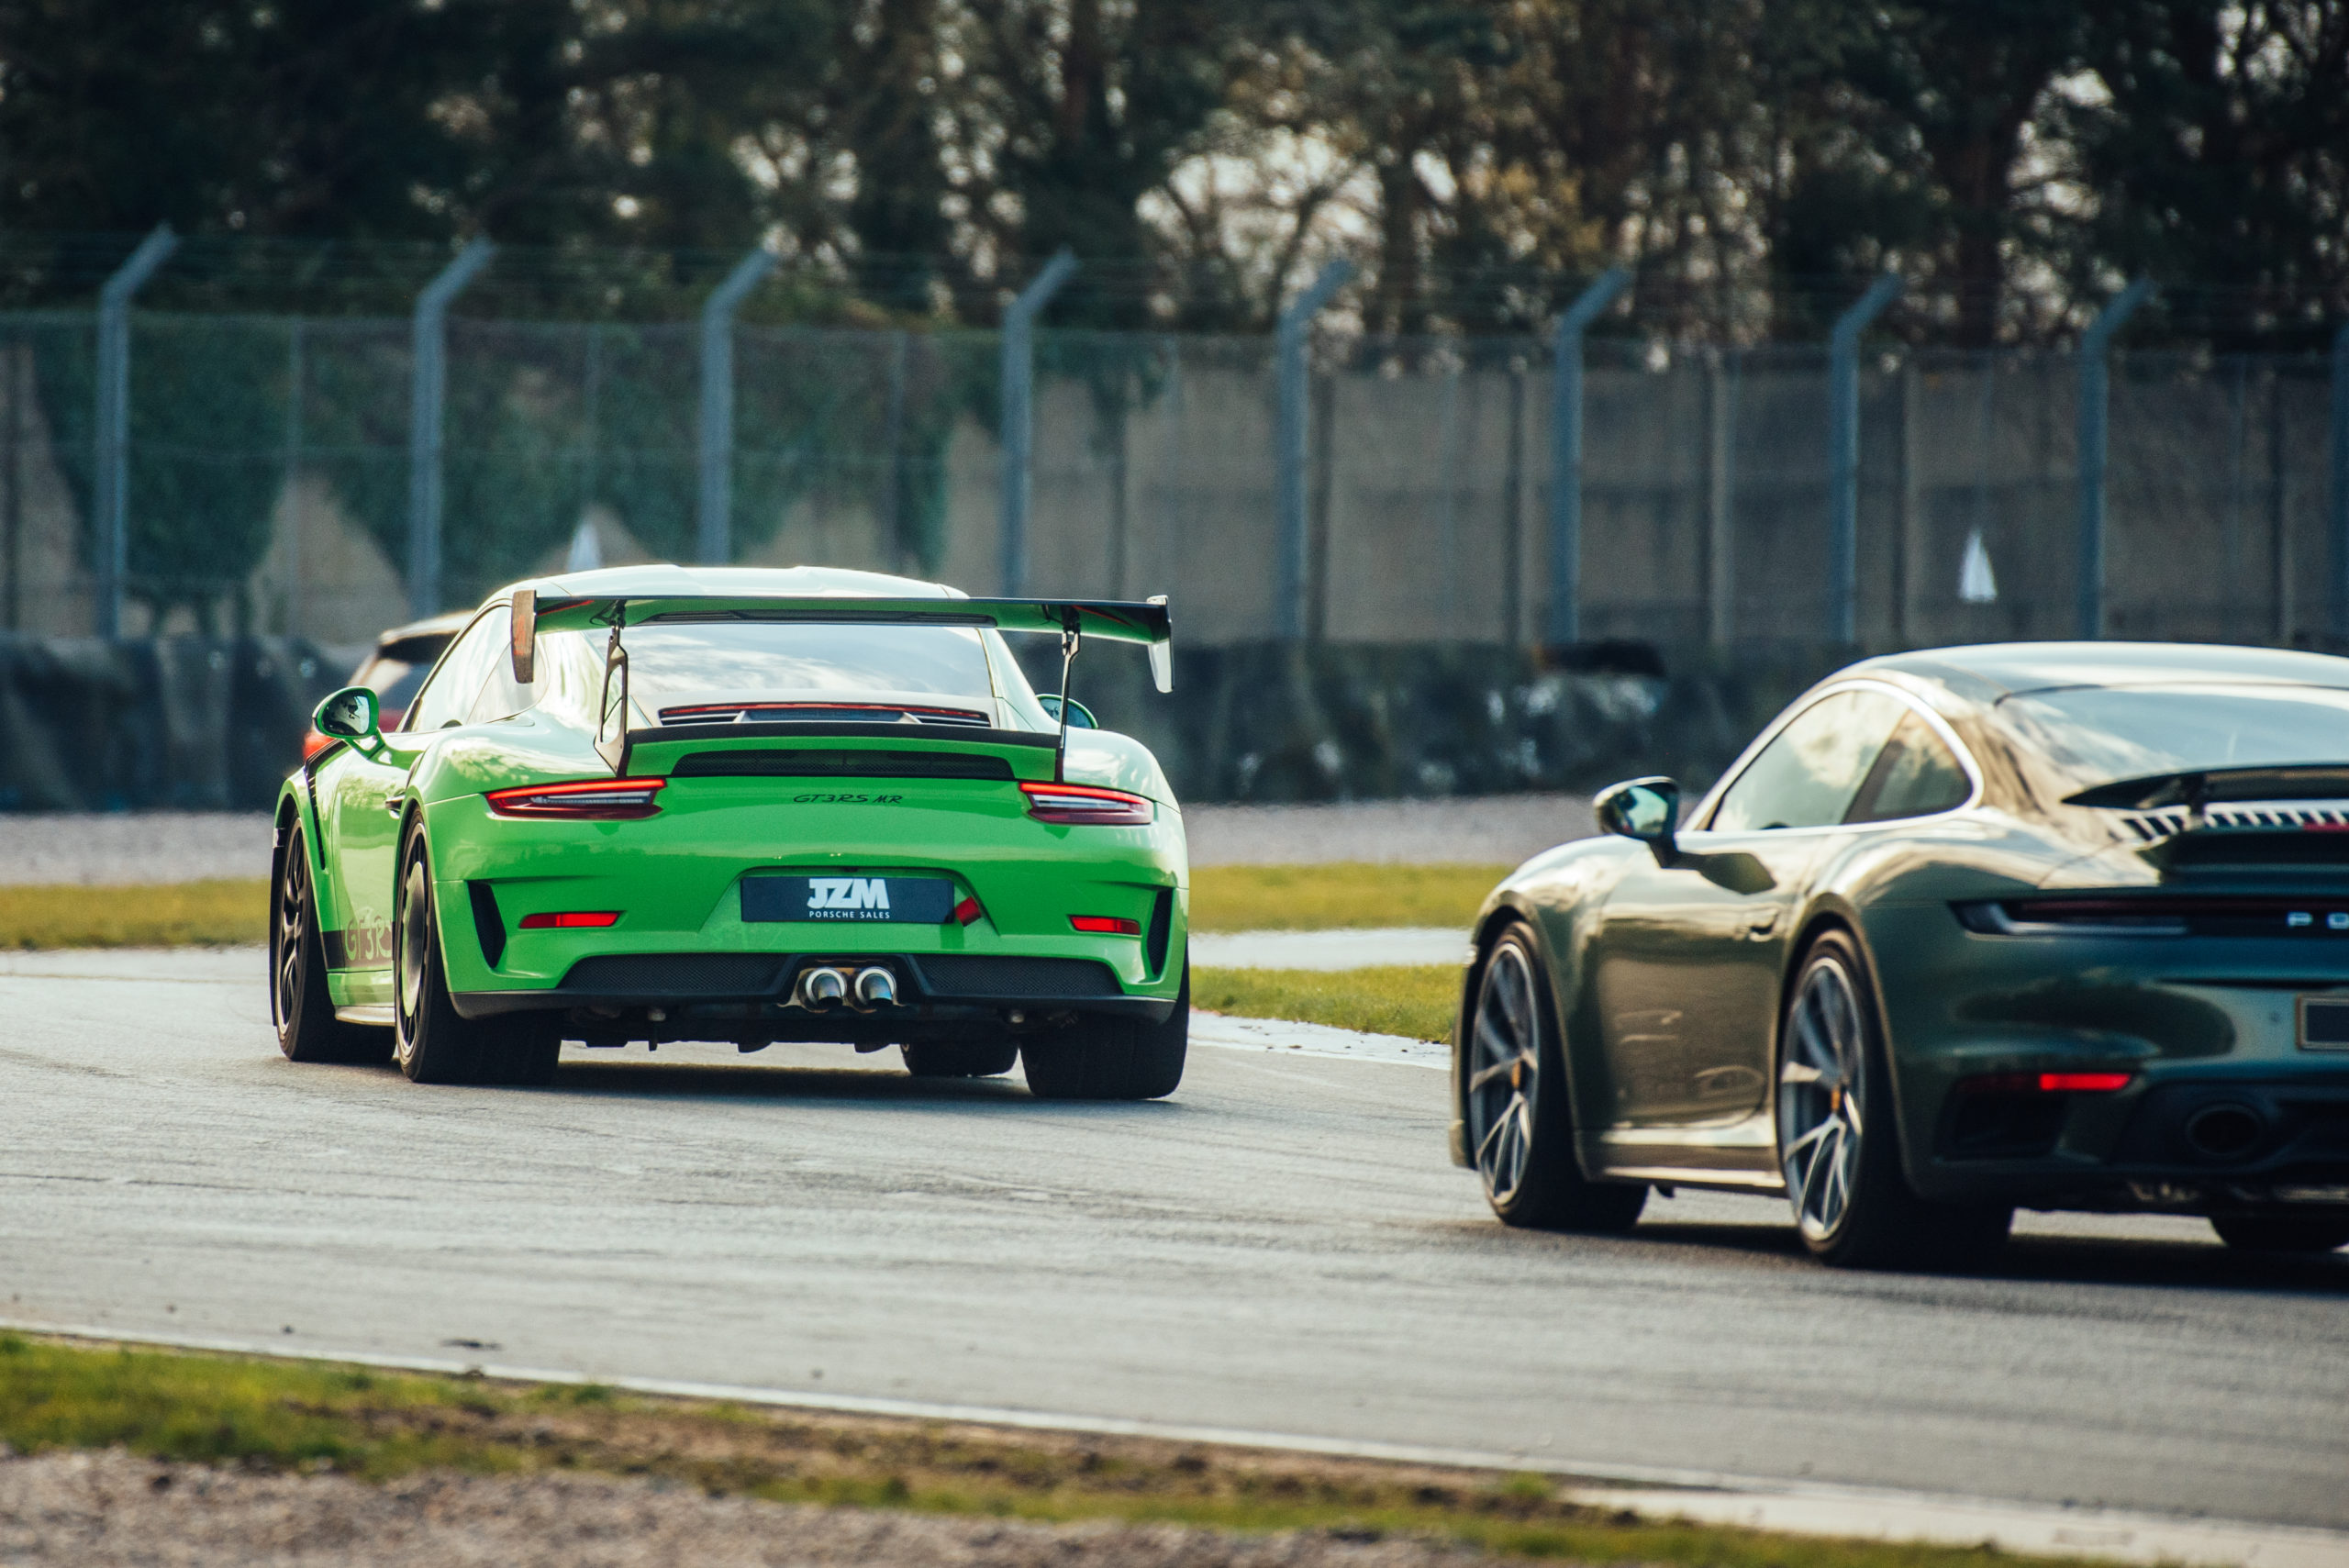 JZM hits the track and kicks off 2022 season with partner JCR and GT3 RS MR